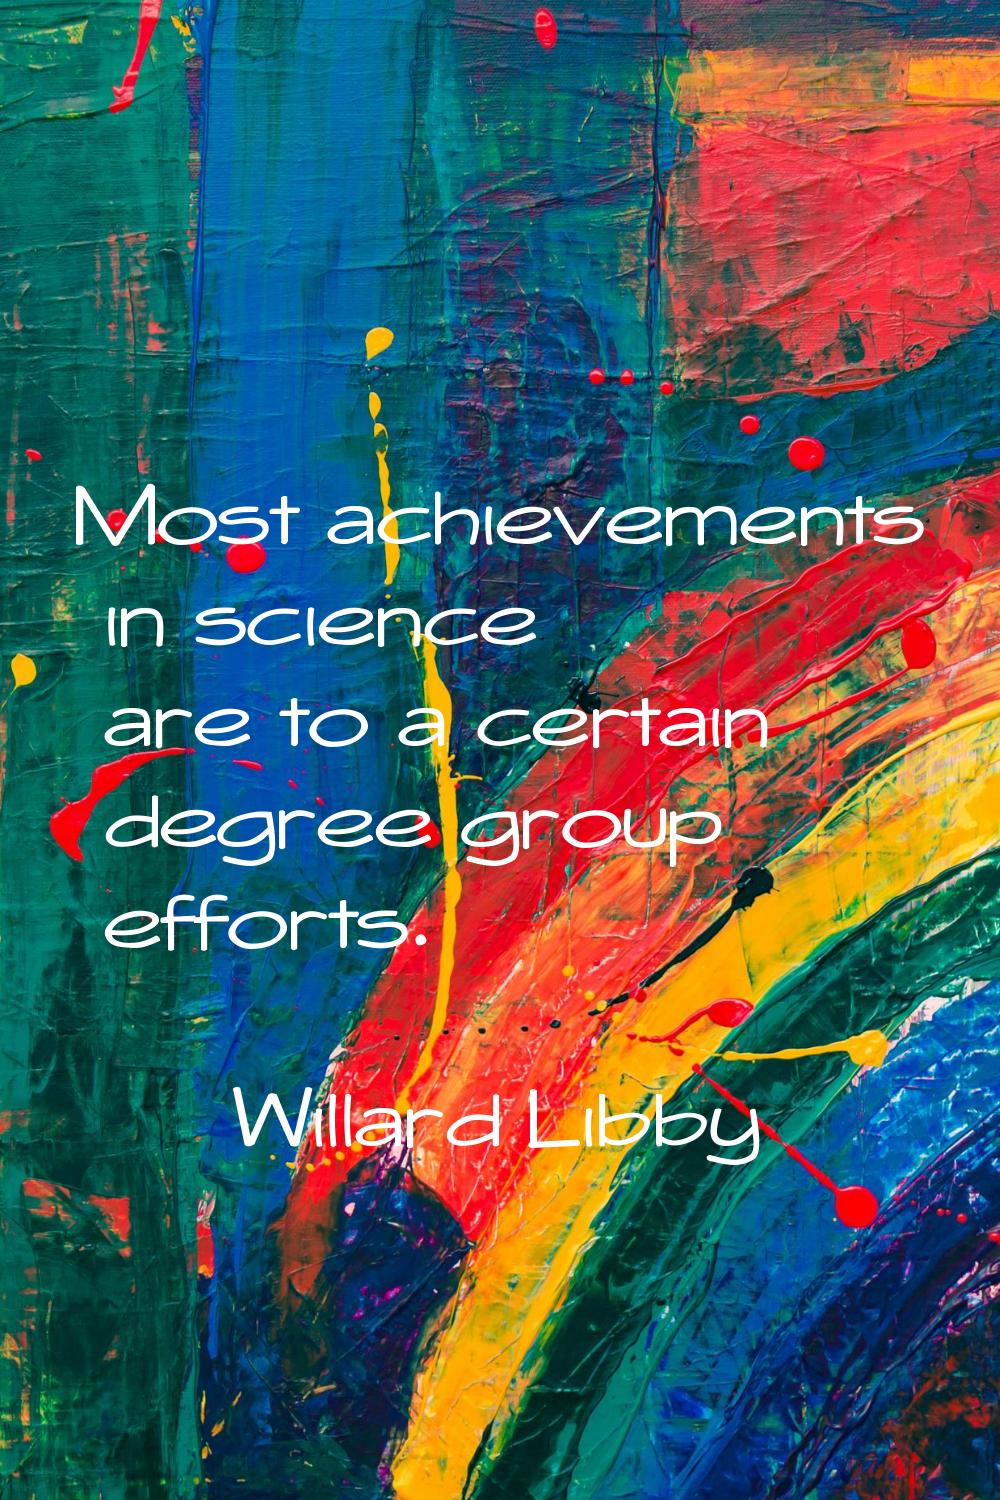 Most achievements in science are to a certain degree group efforts.